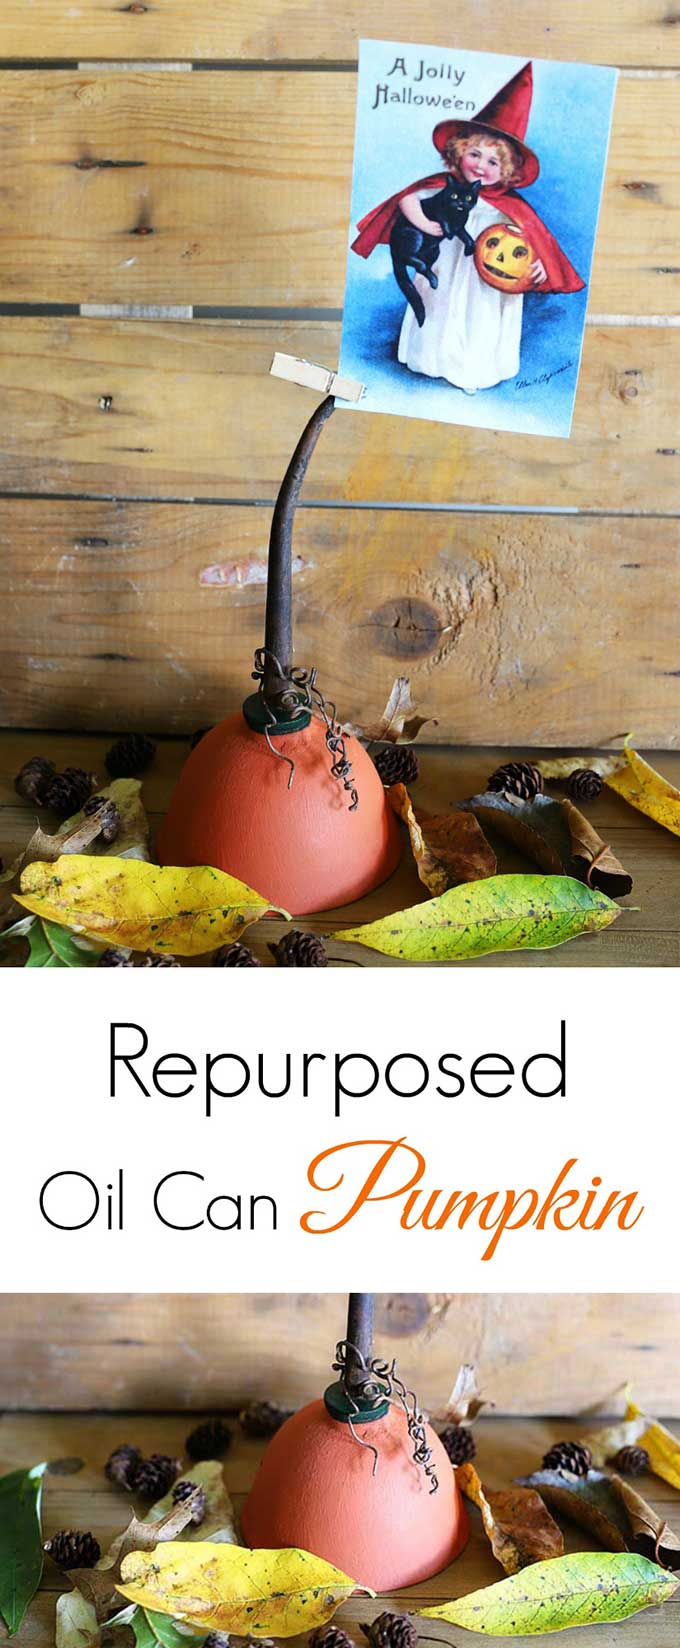 A repurposed oil can makes for a fun pumpkin photo holder for fall. A QUICK and EASY fall DIY project with vintage Halloween printable image included. #repurpose #upcycle #upcycling #thriftstoreupcycle #halloween #halloweendecor #halloweendecorations #falldecor #falldiy